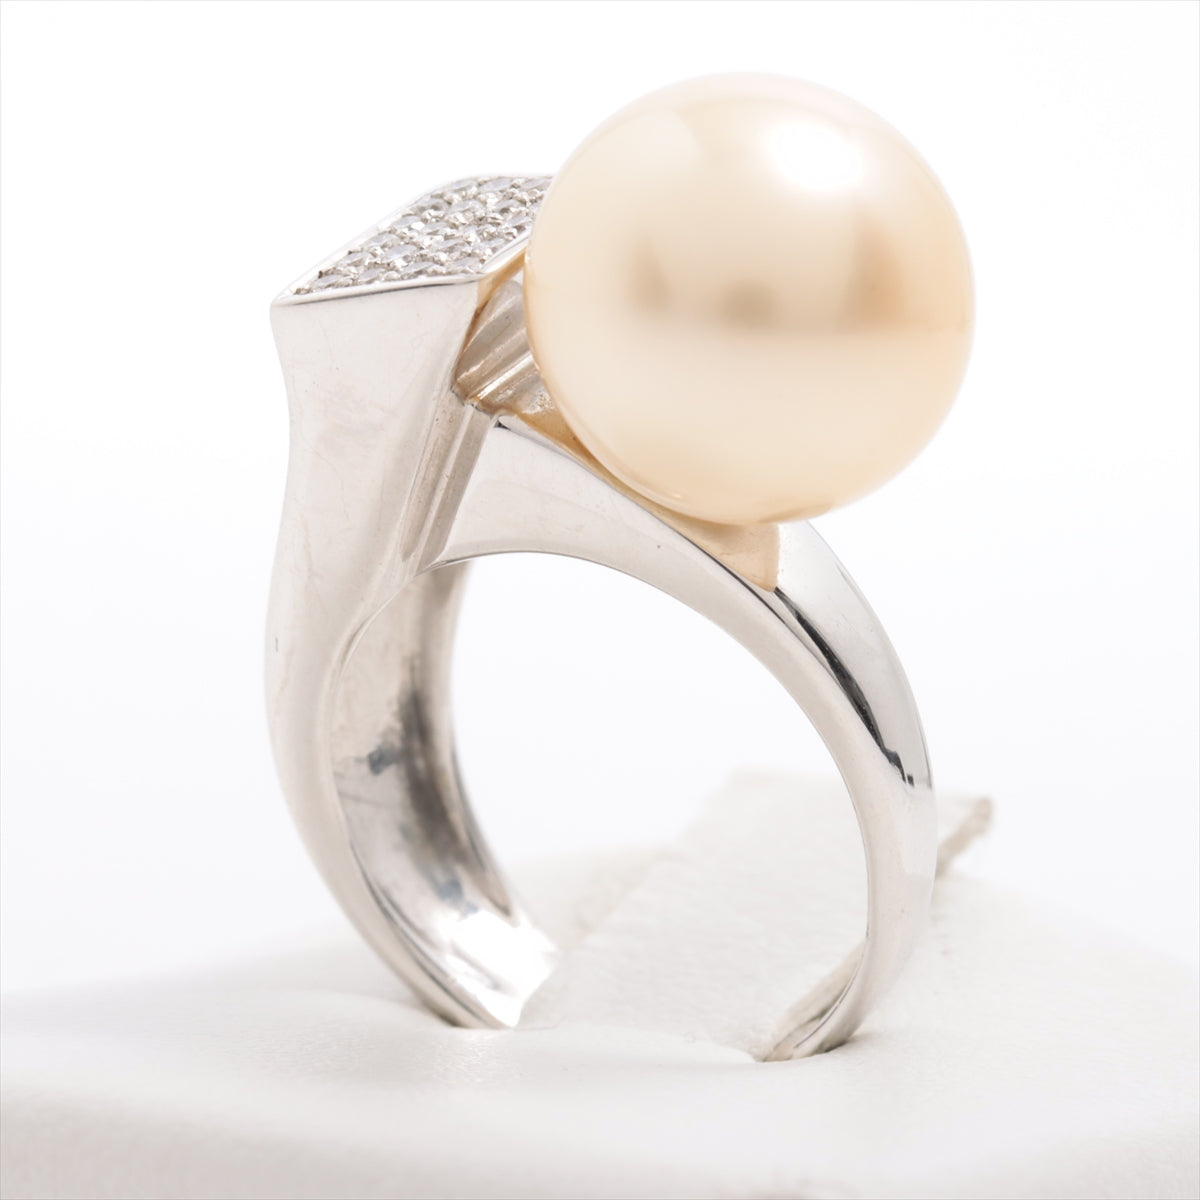 Queen Pearl Diamond Ring 750(WG) 11.5g 0.20 Approx. 12.5 mm